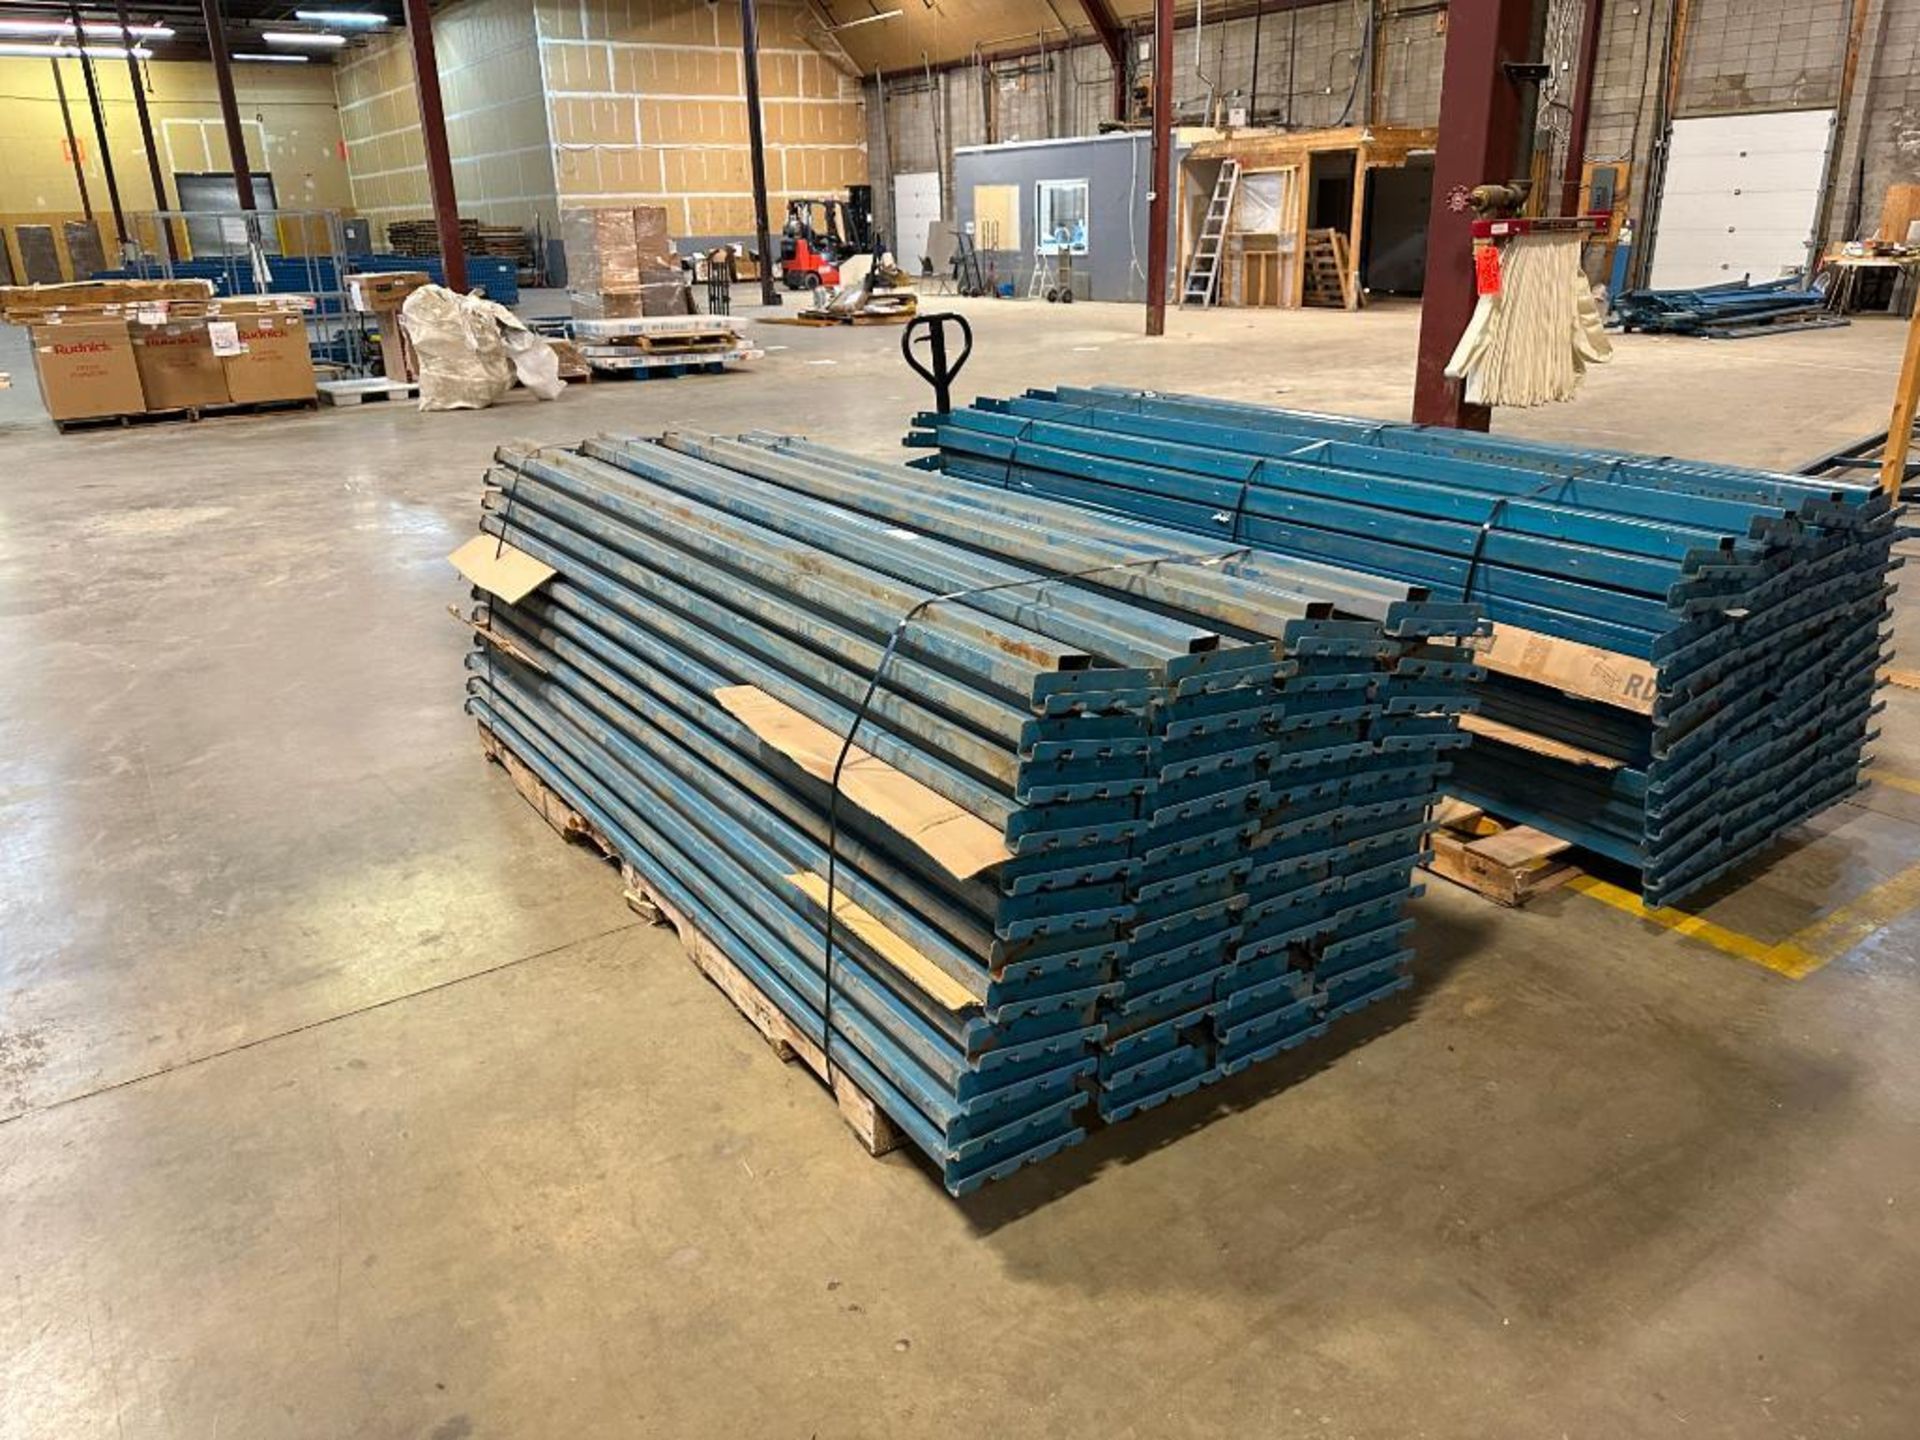 Lot of Approx. (48) 9' Pallet Racking Beams